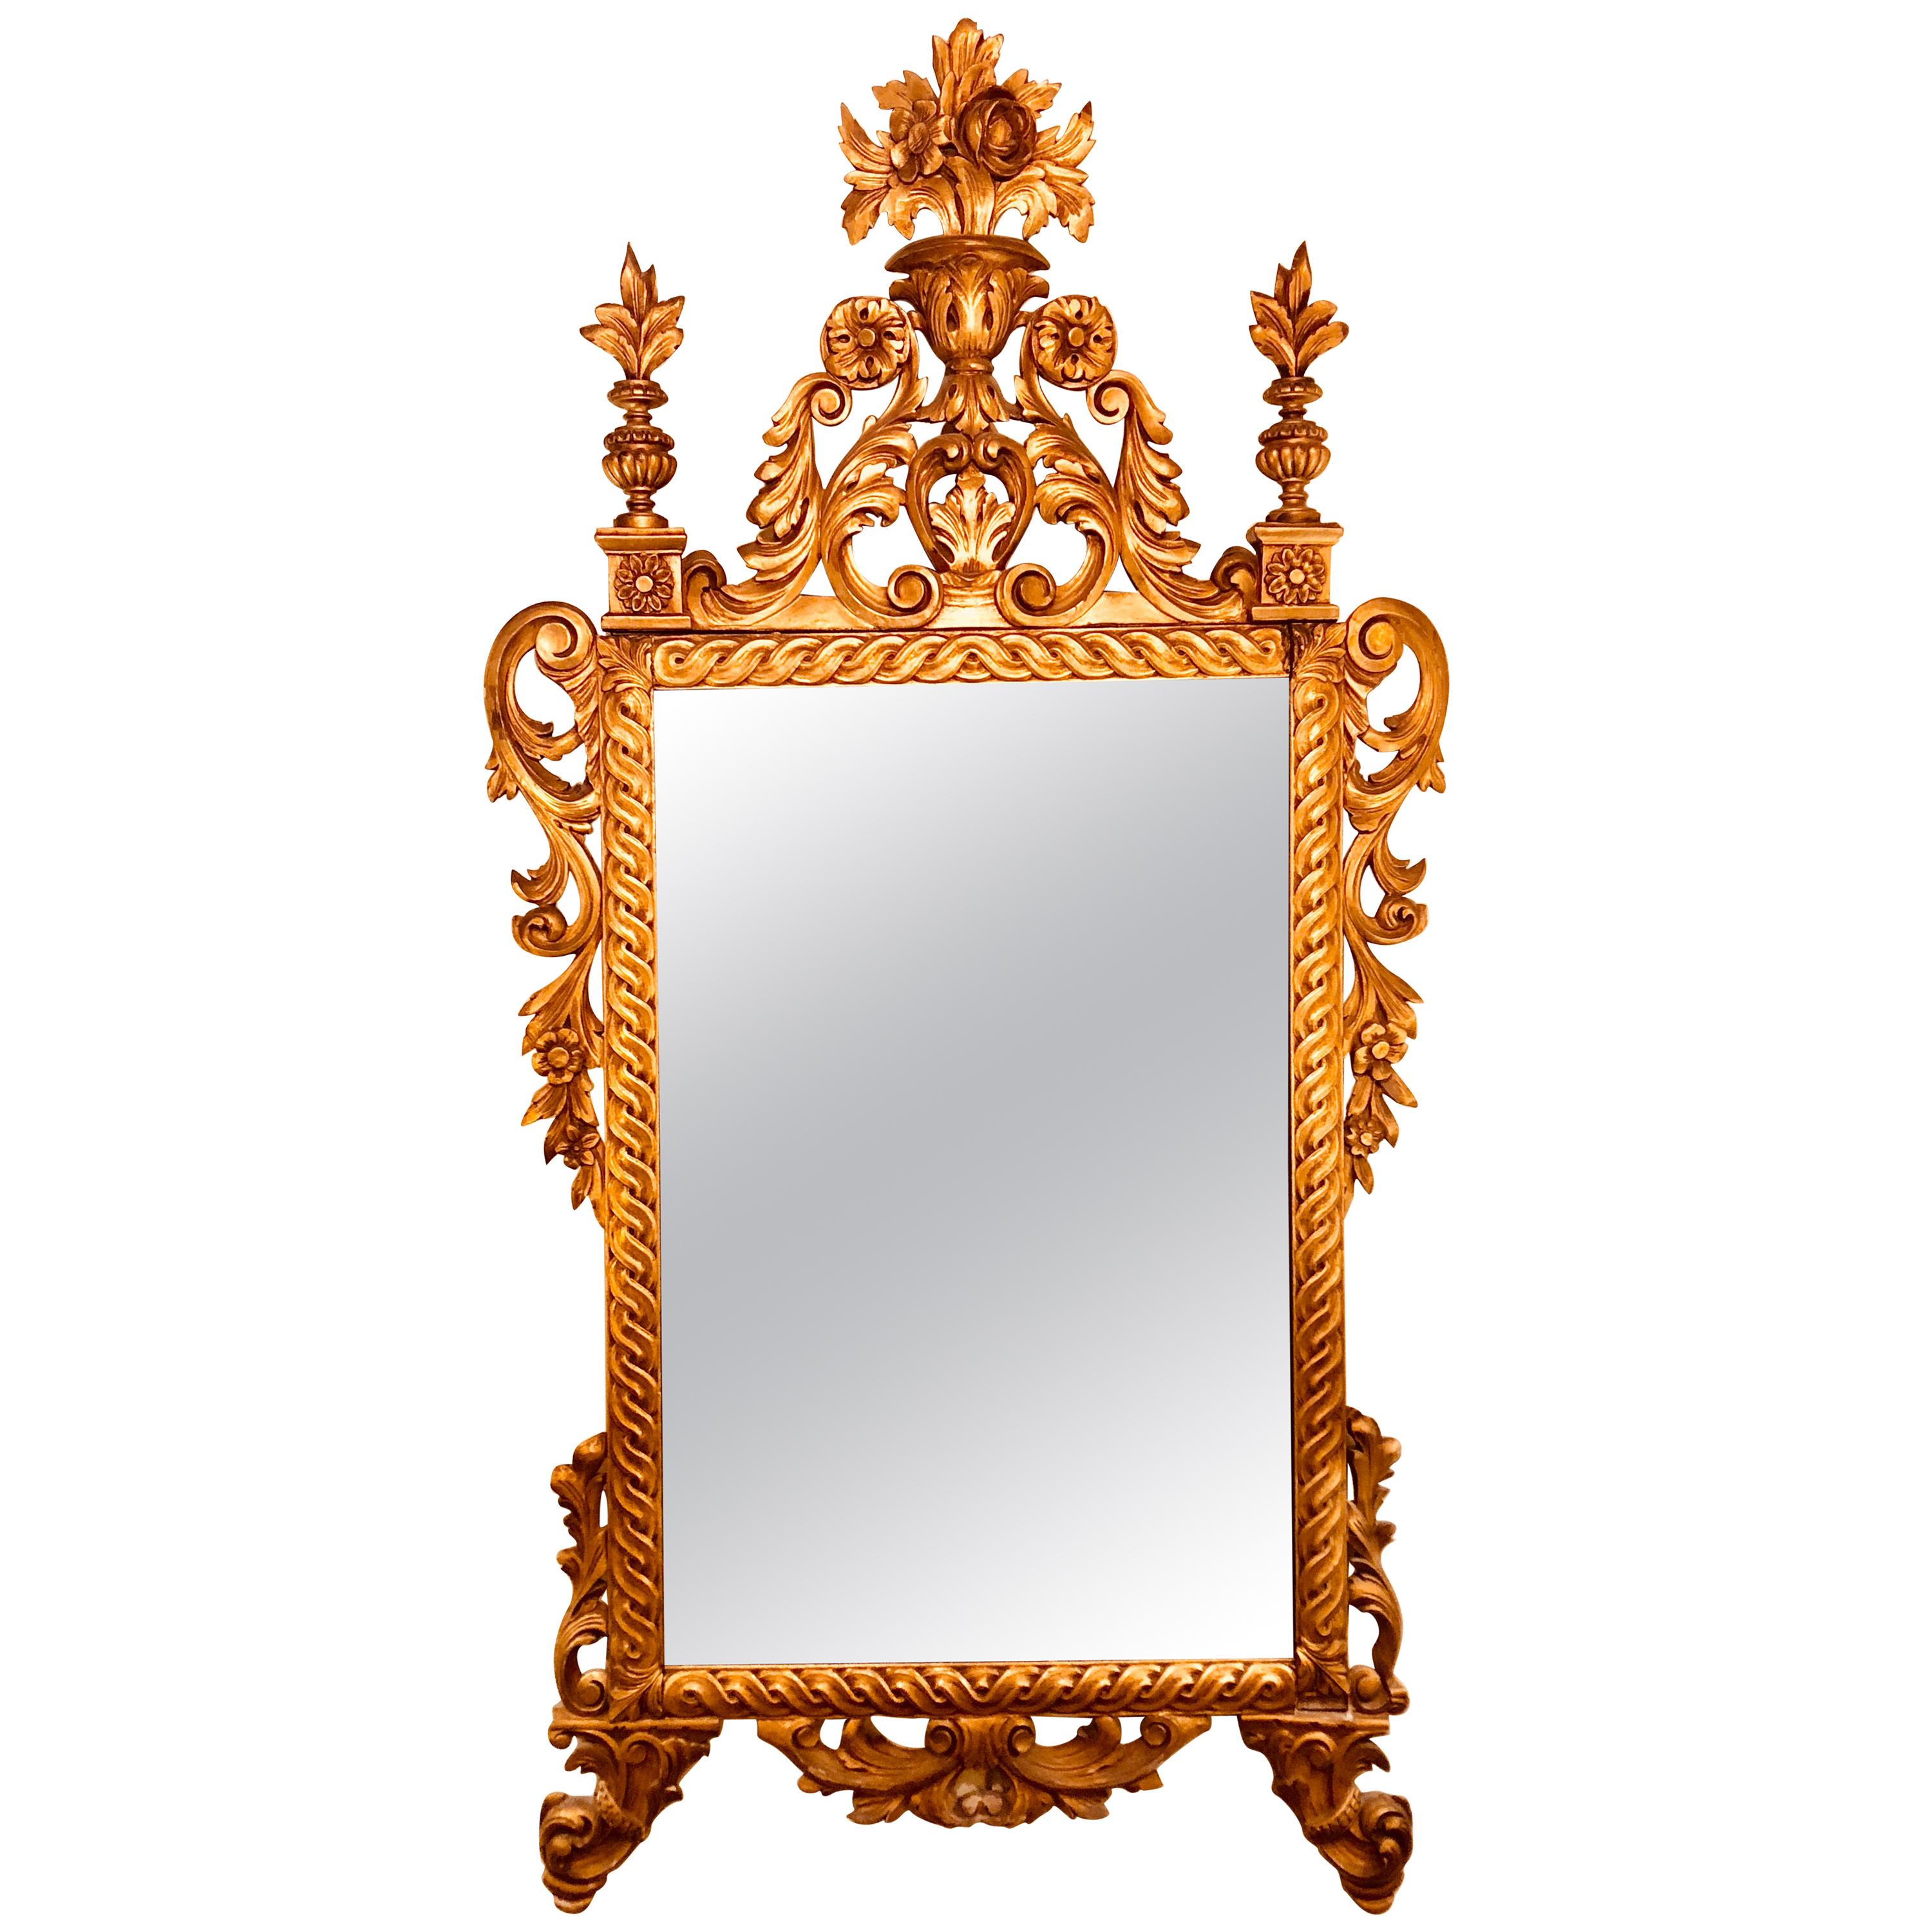 French Louis XV Style Giltwood Mirror with Carvings of Flowers, Leaves & Scrolls